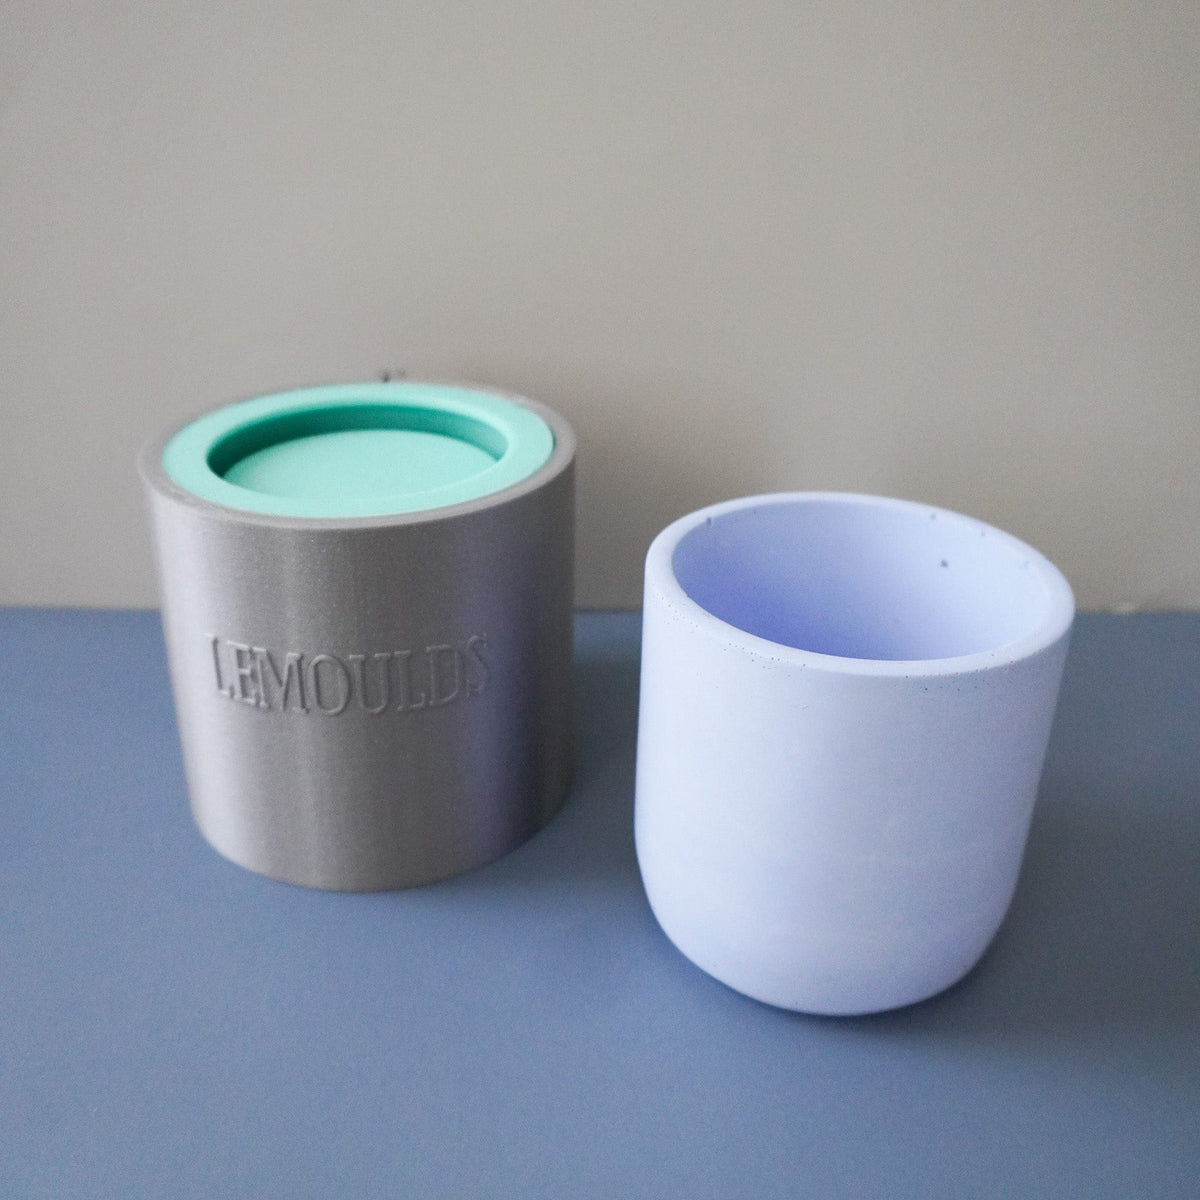 silicone pot mould with outside support ring and blue concrete pot